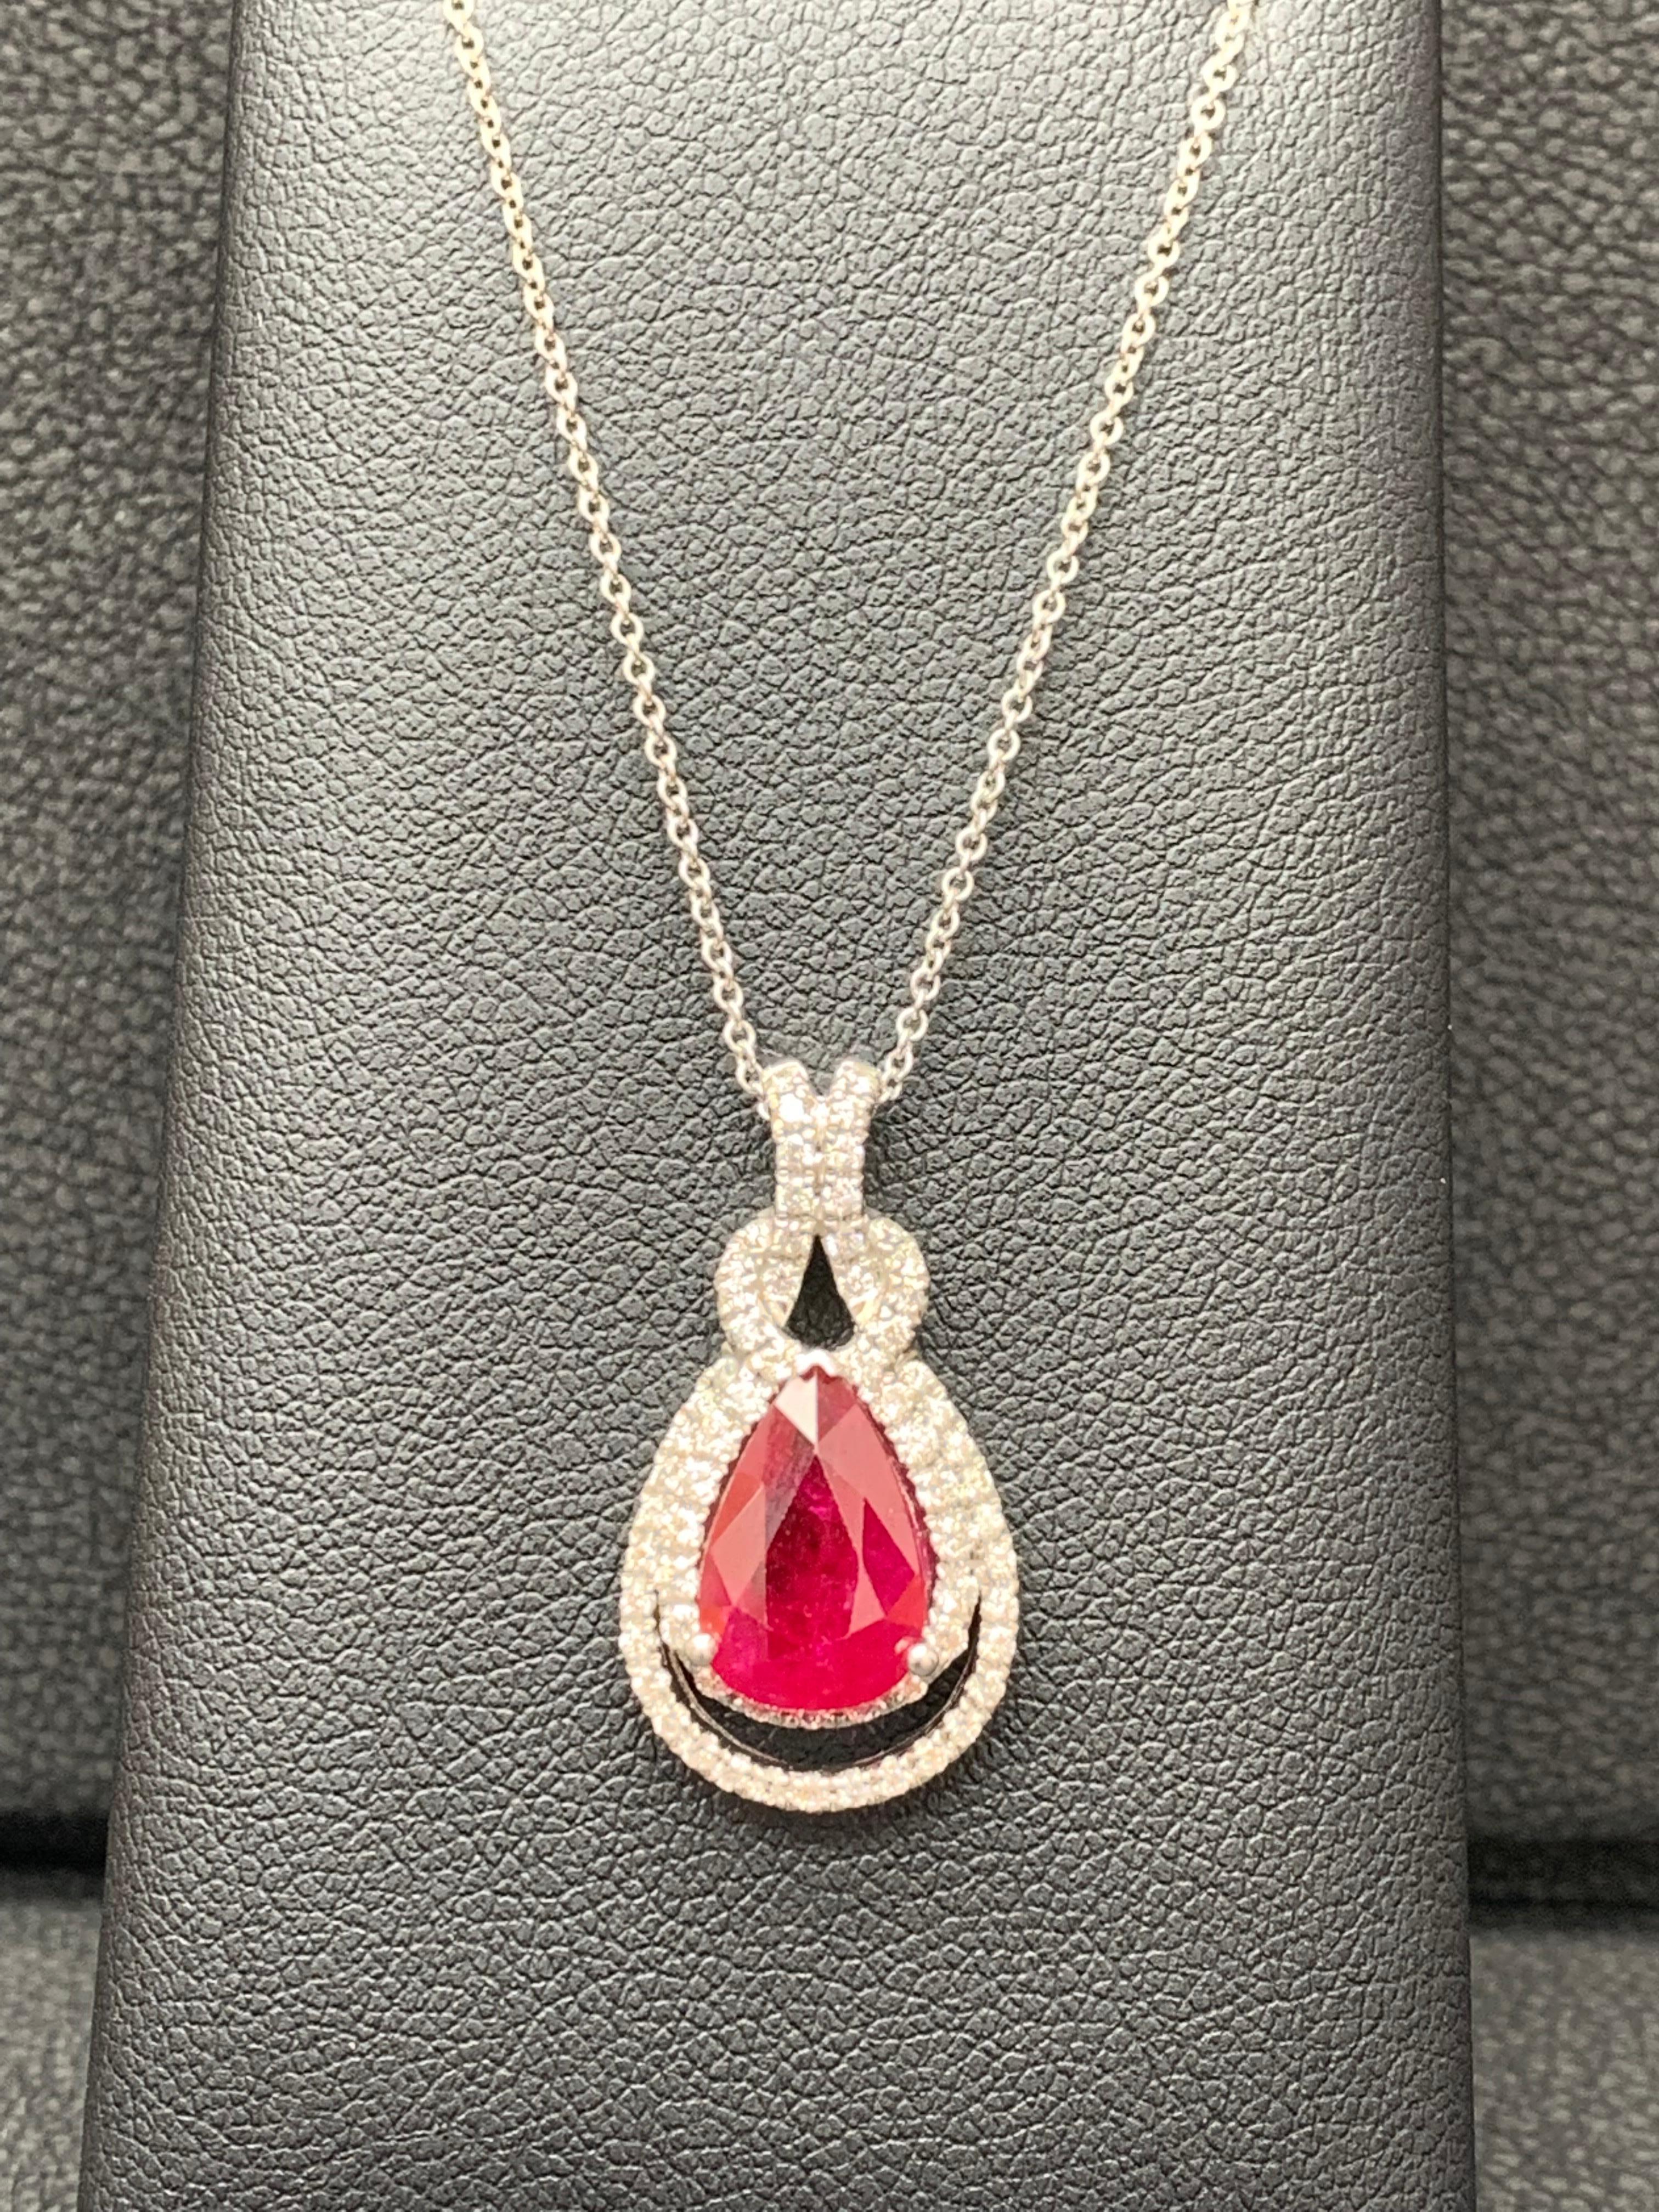 Showcasing a pear shape 0.51 Carat Ruby surrounded by two-rows of round brilliant diamonds in a open-work design. 31 round Diamonds weigh 0.26 carats total. 18